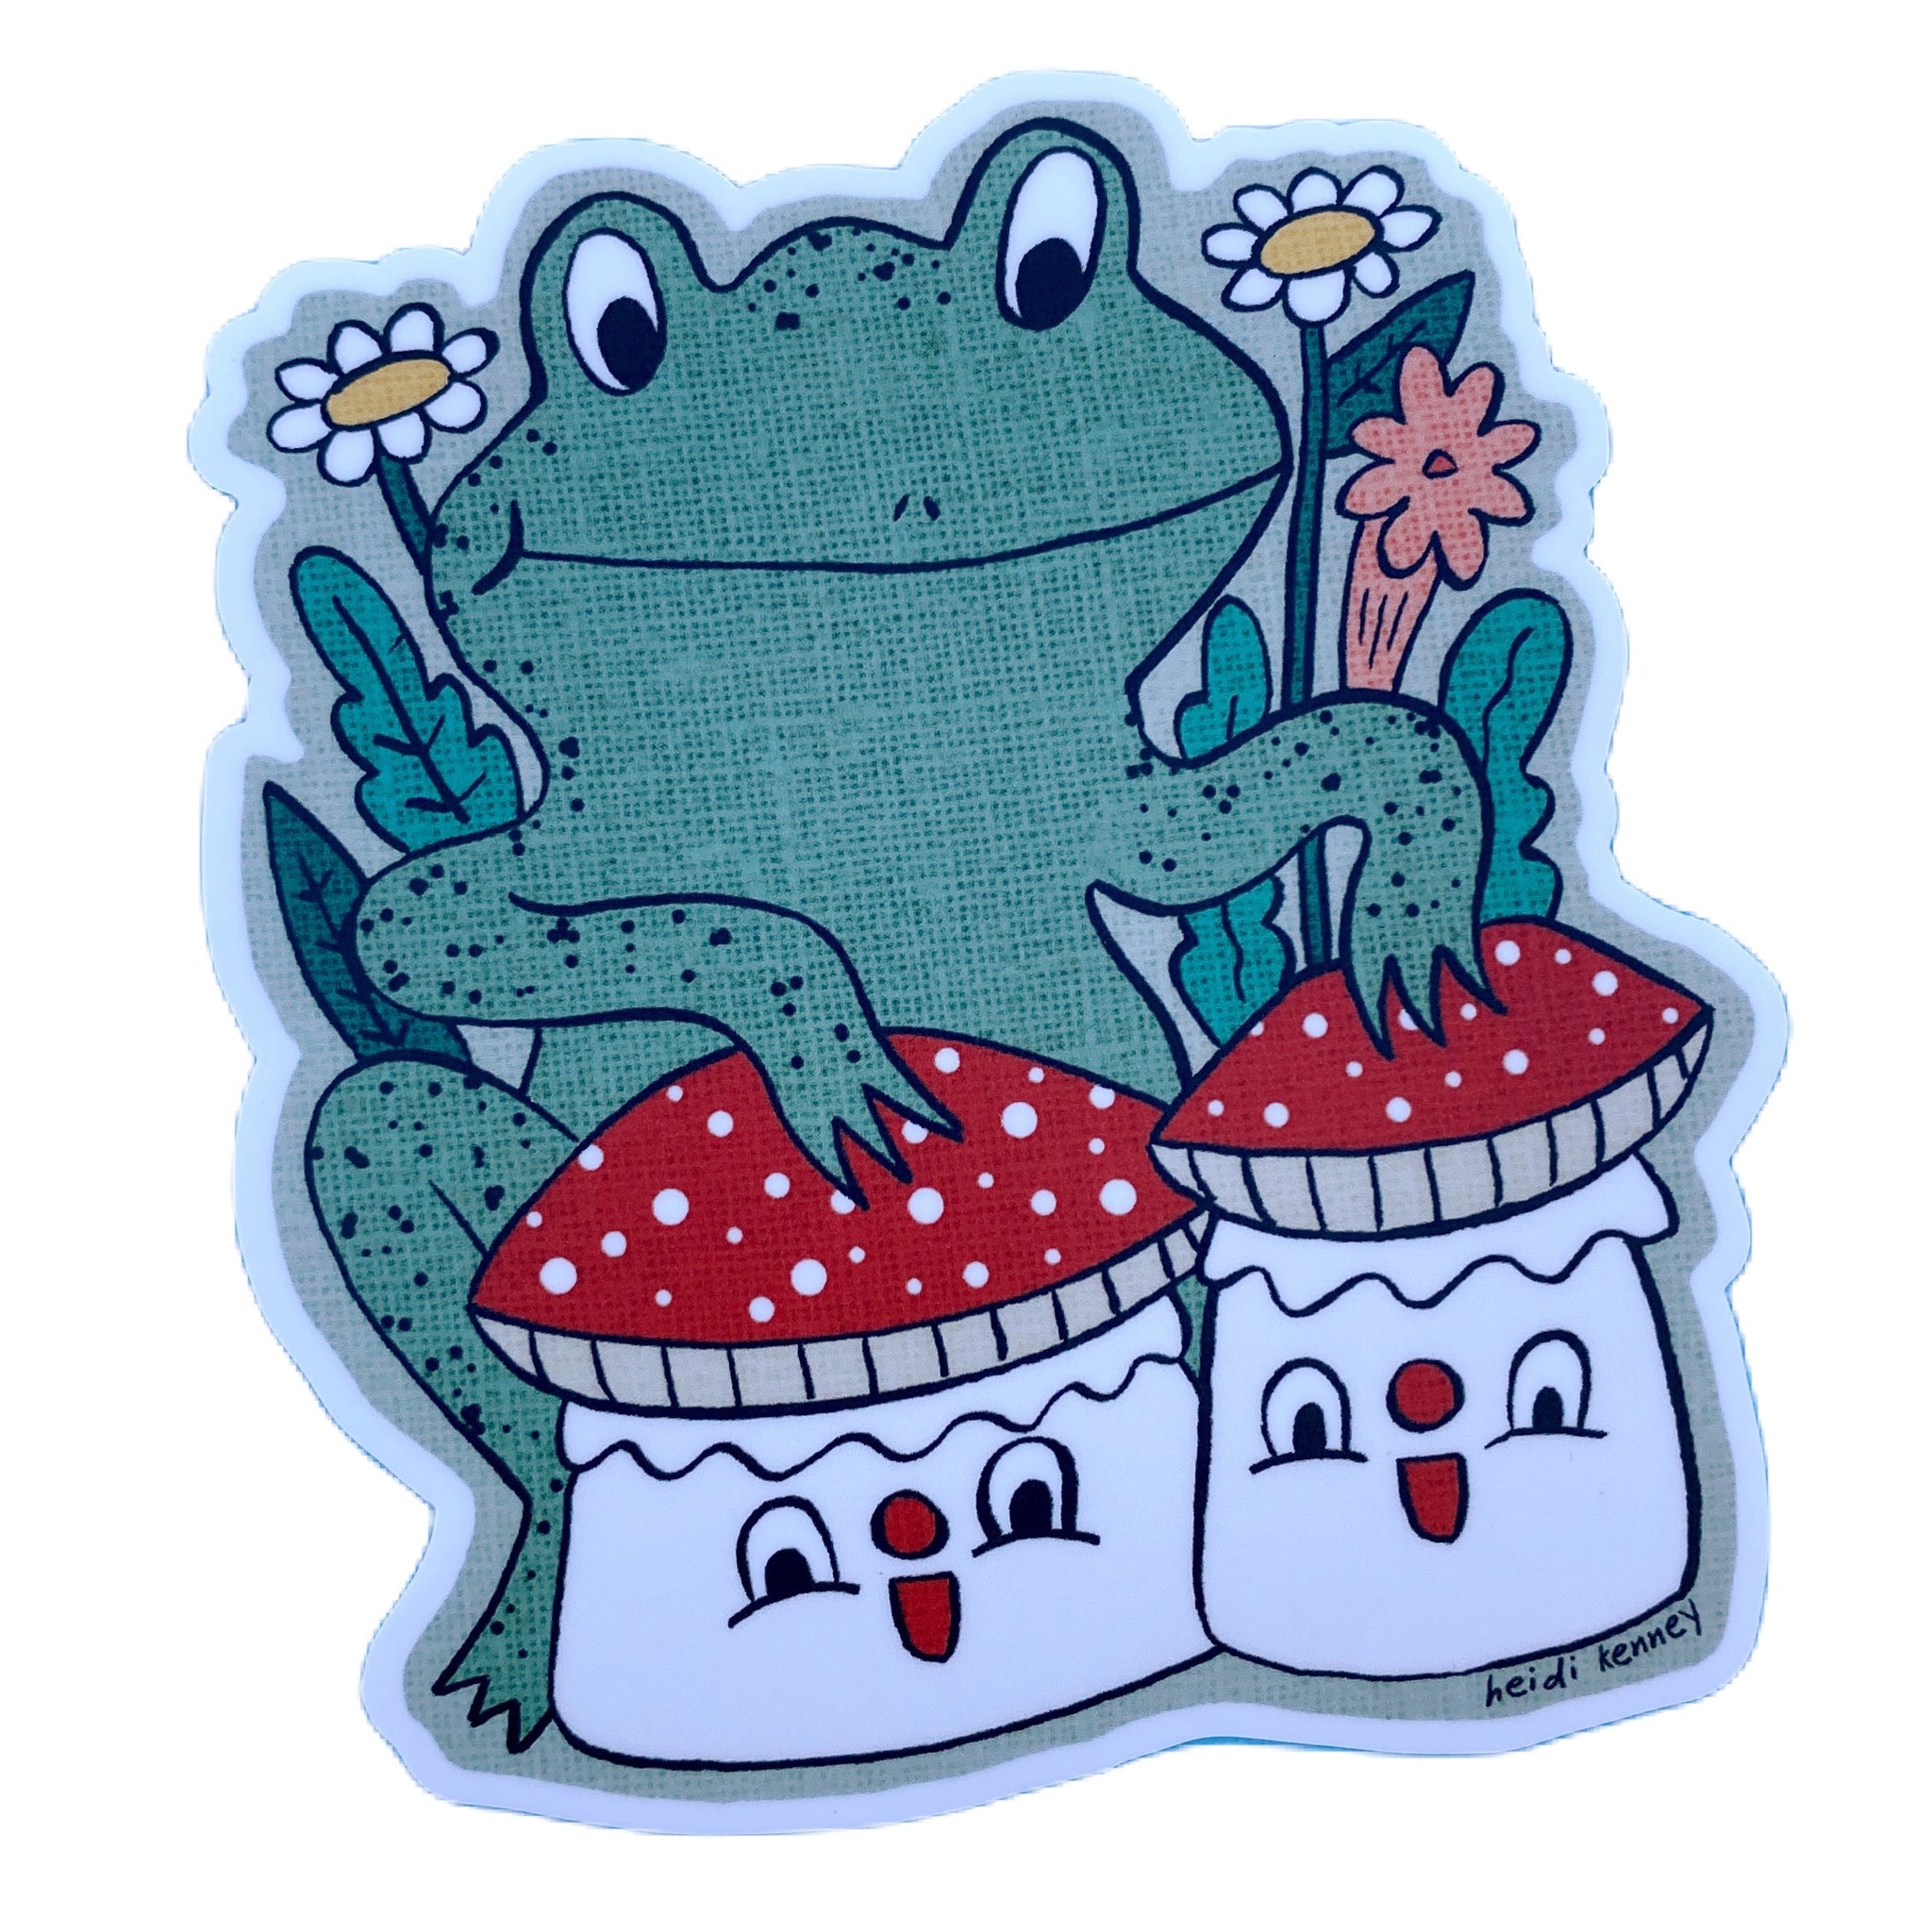 Grompy the Frog Sticker Sheet – From Kioni